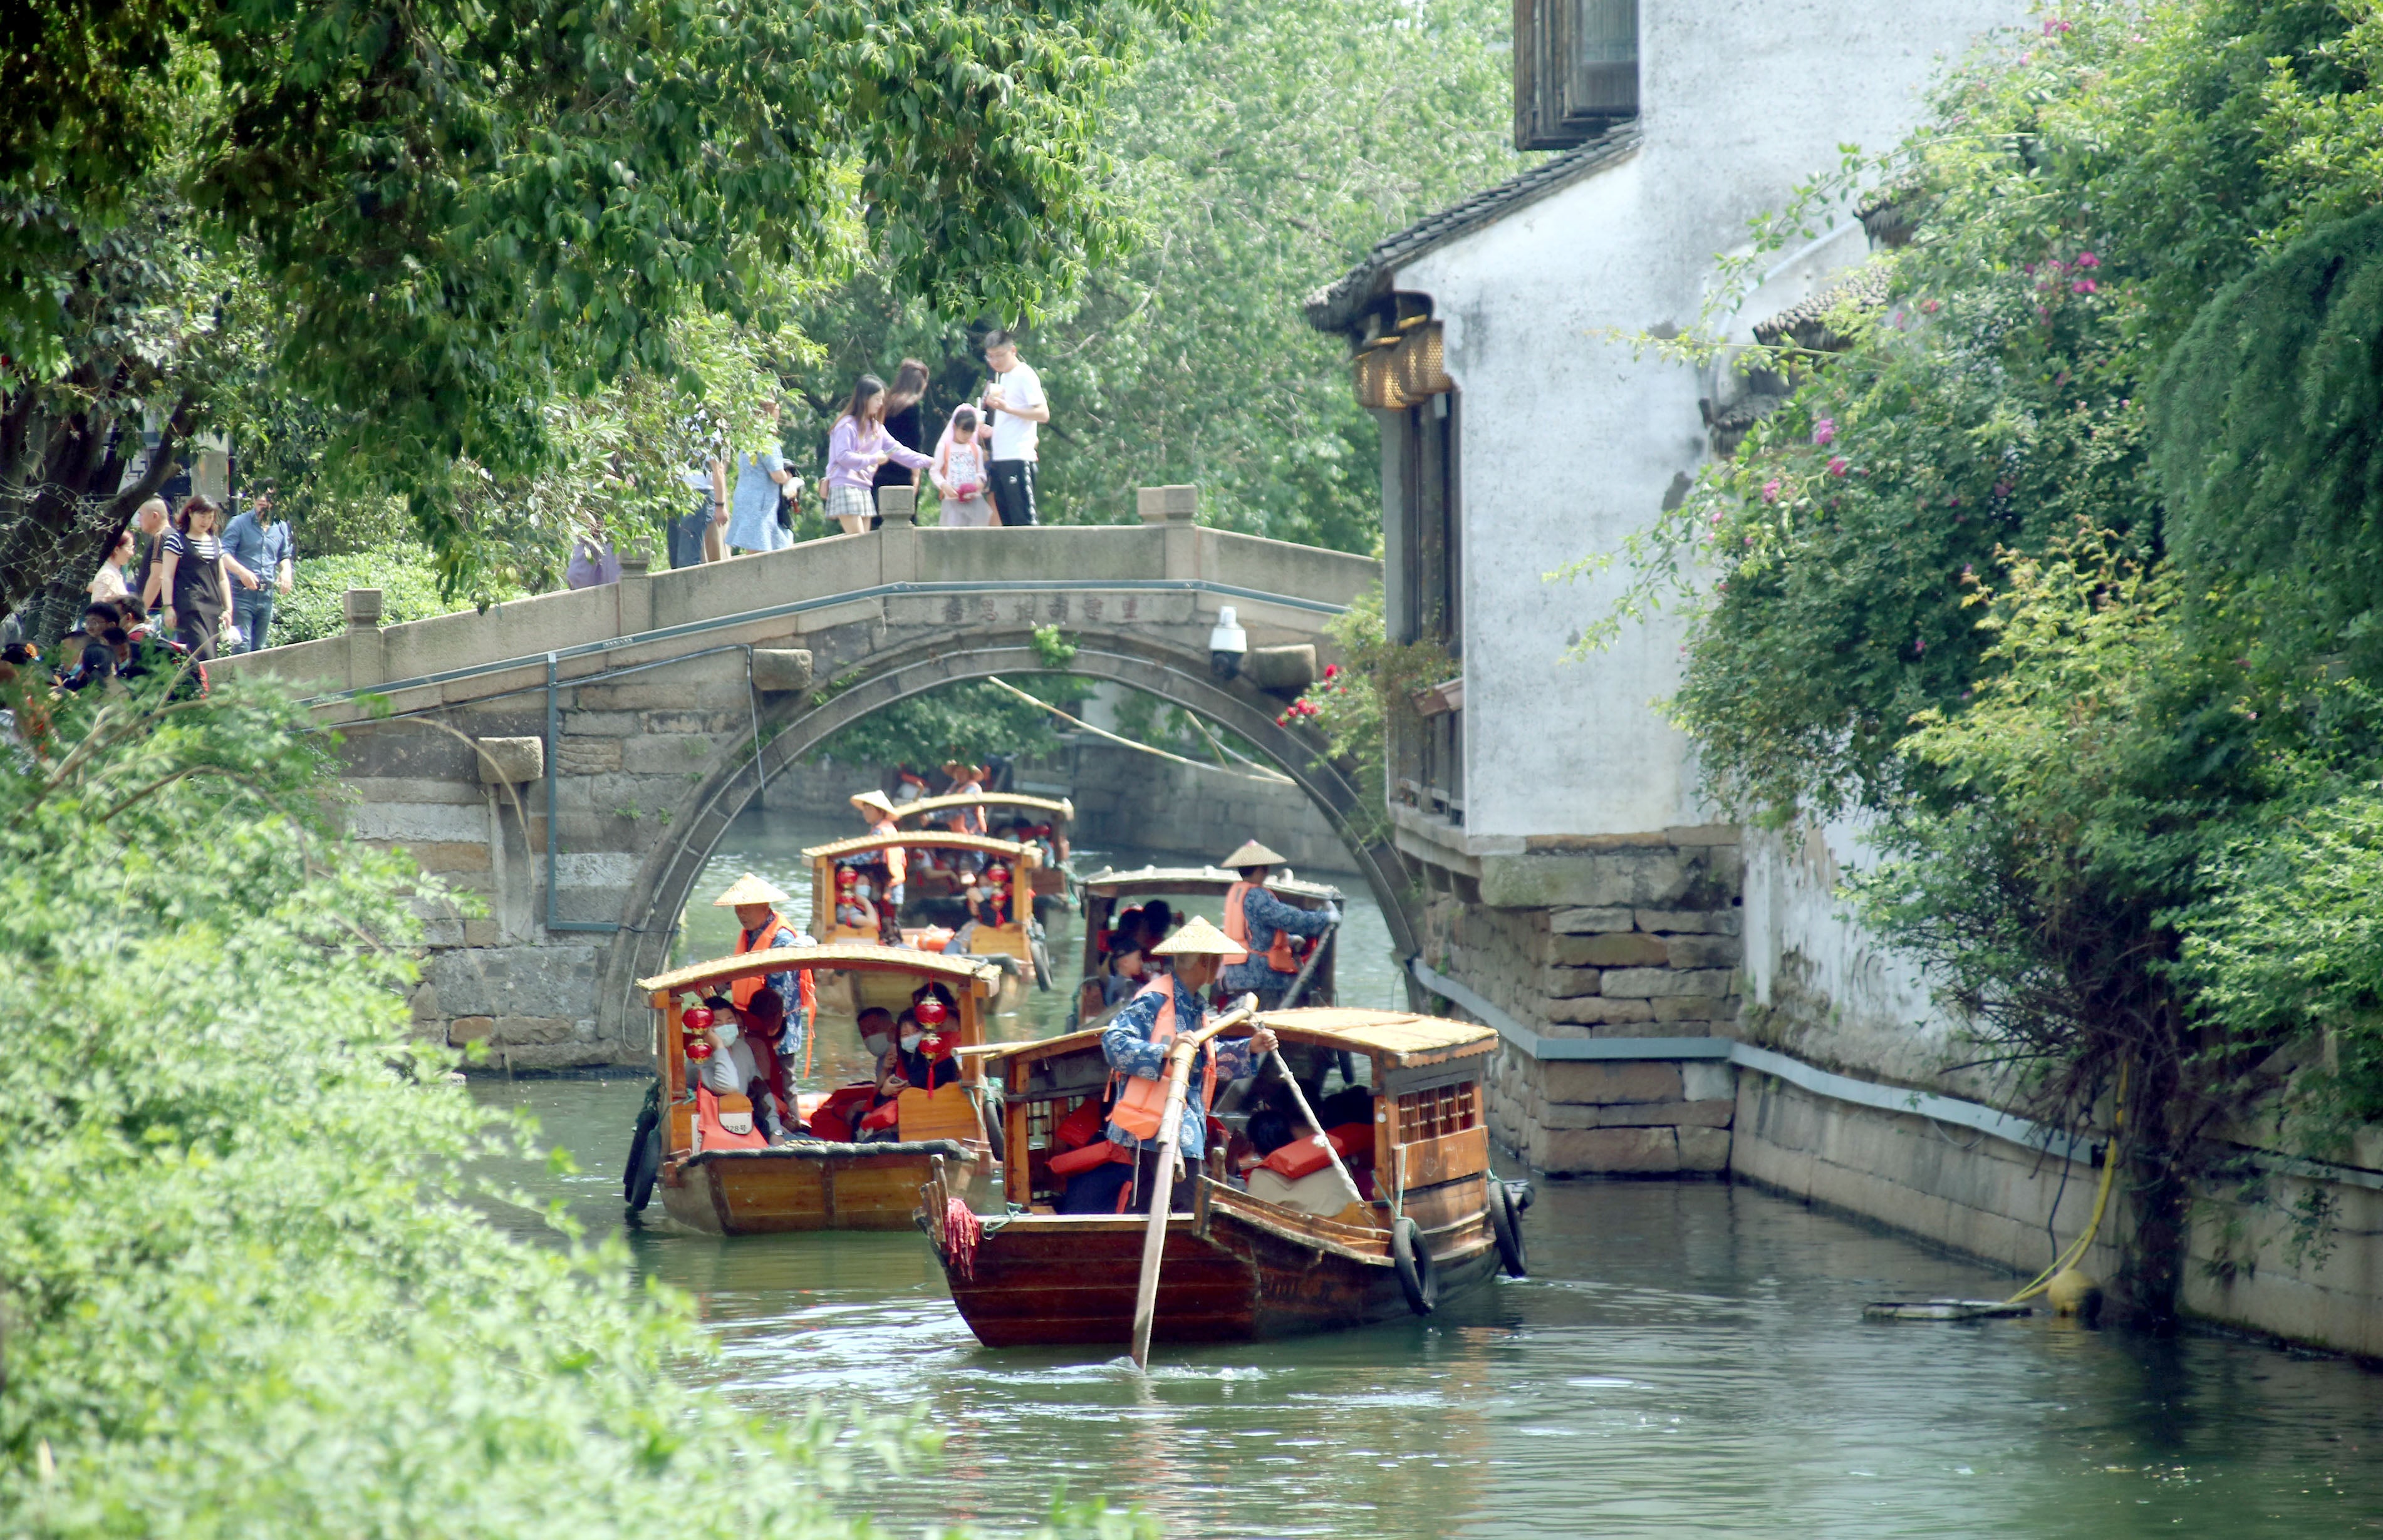 Tourists enjoy cruising on a canal near Pingjiang Road, an ancient area centred on a one-mile-long lane that boasts a long history in Suzhou, Jiangsu province